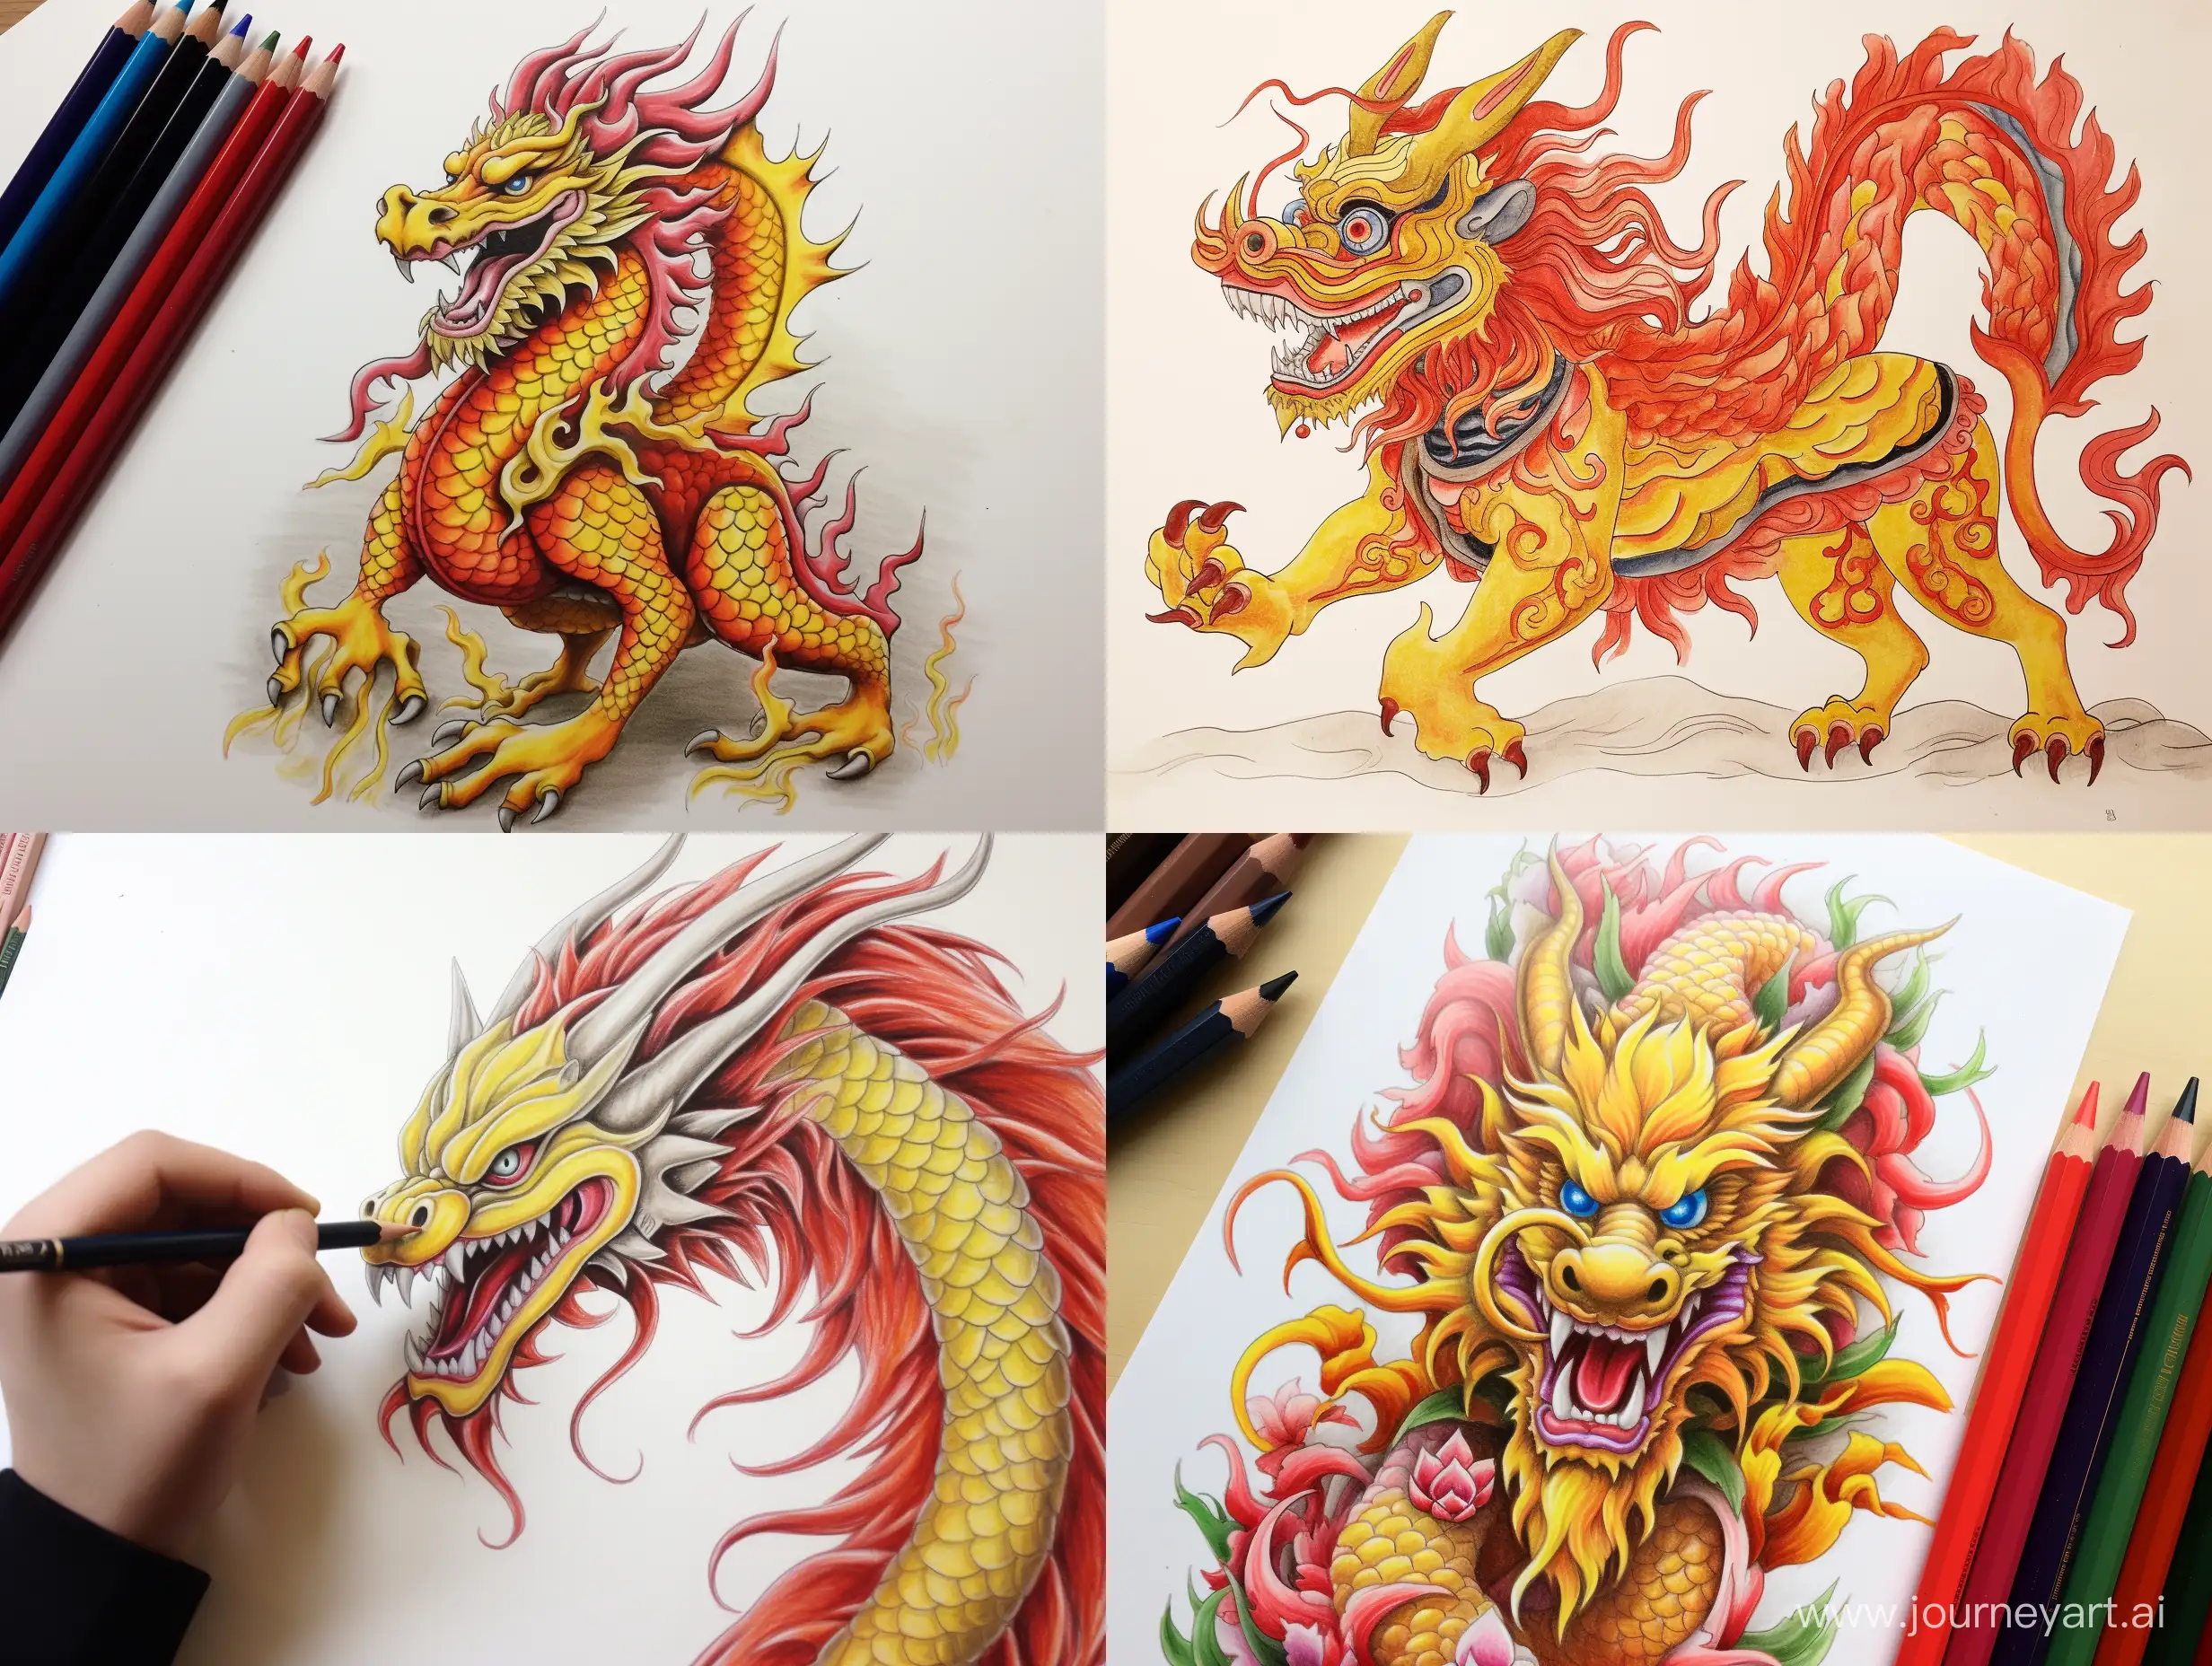  Let's draw 1 mighty dragon, red yellow, suitable for the Lunar New Year, standing, bending body